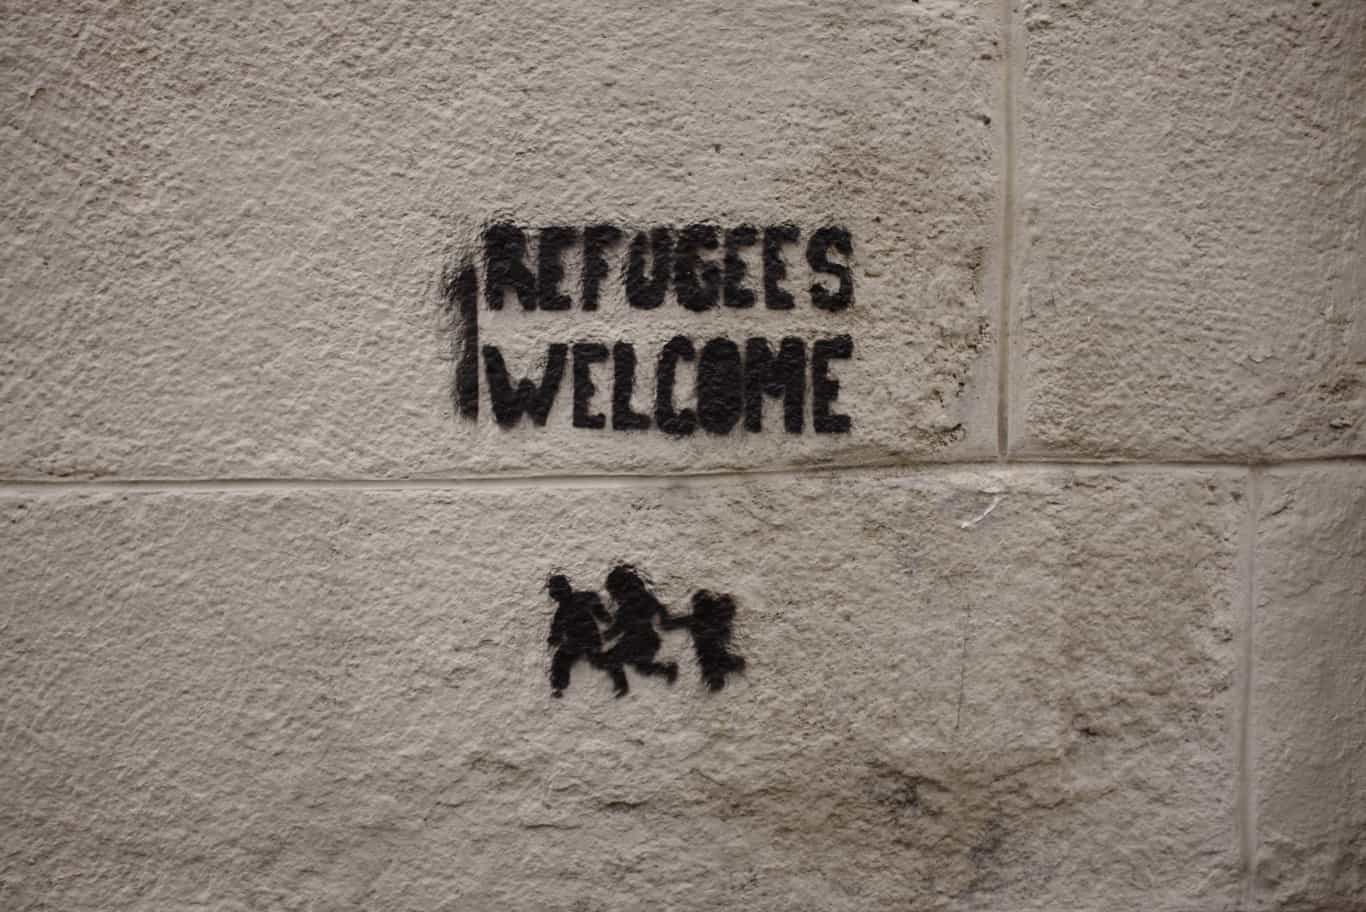 refugees+in+Spain | Refugees Welcome